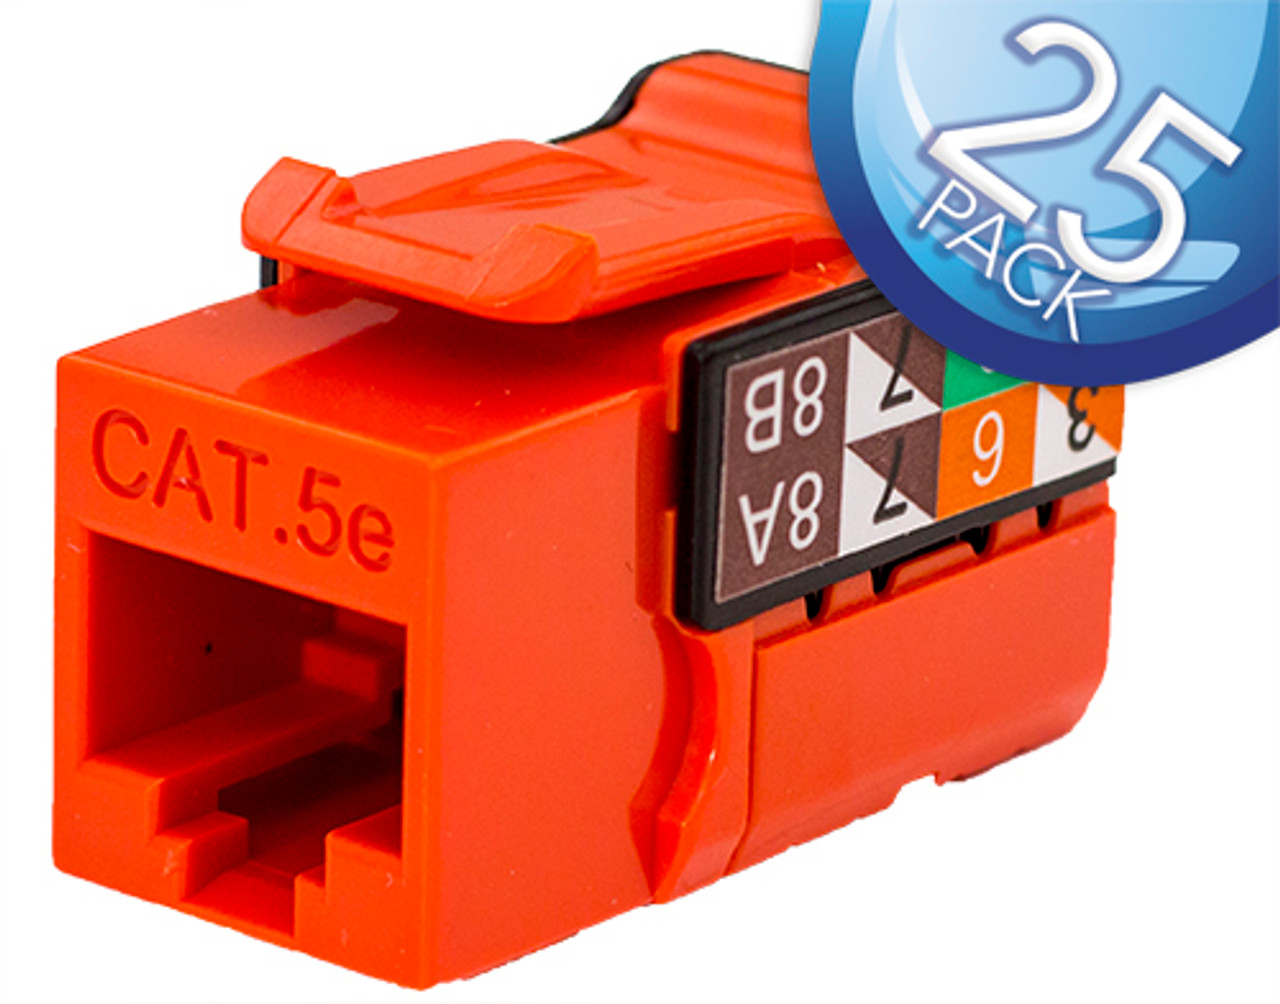 CAT5E Data Grade Keystone Jack – 25 Pack, RJ45, 8×8, Terminate These Jacks with our I-Punch Tool